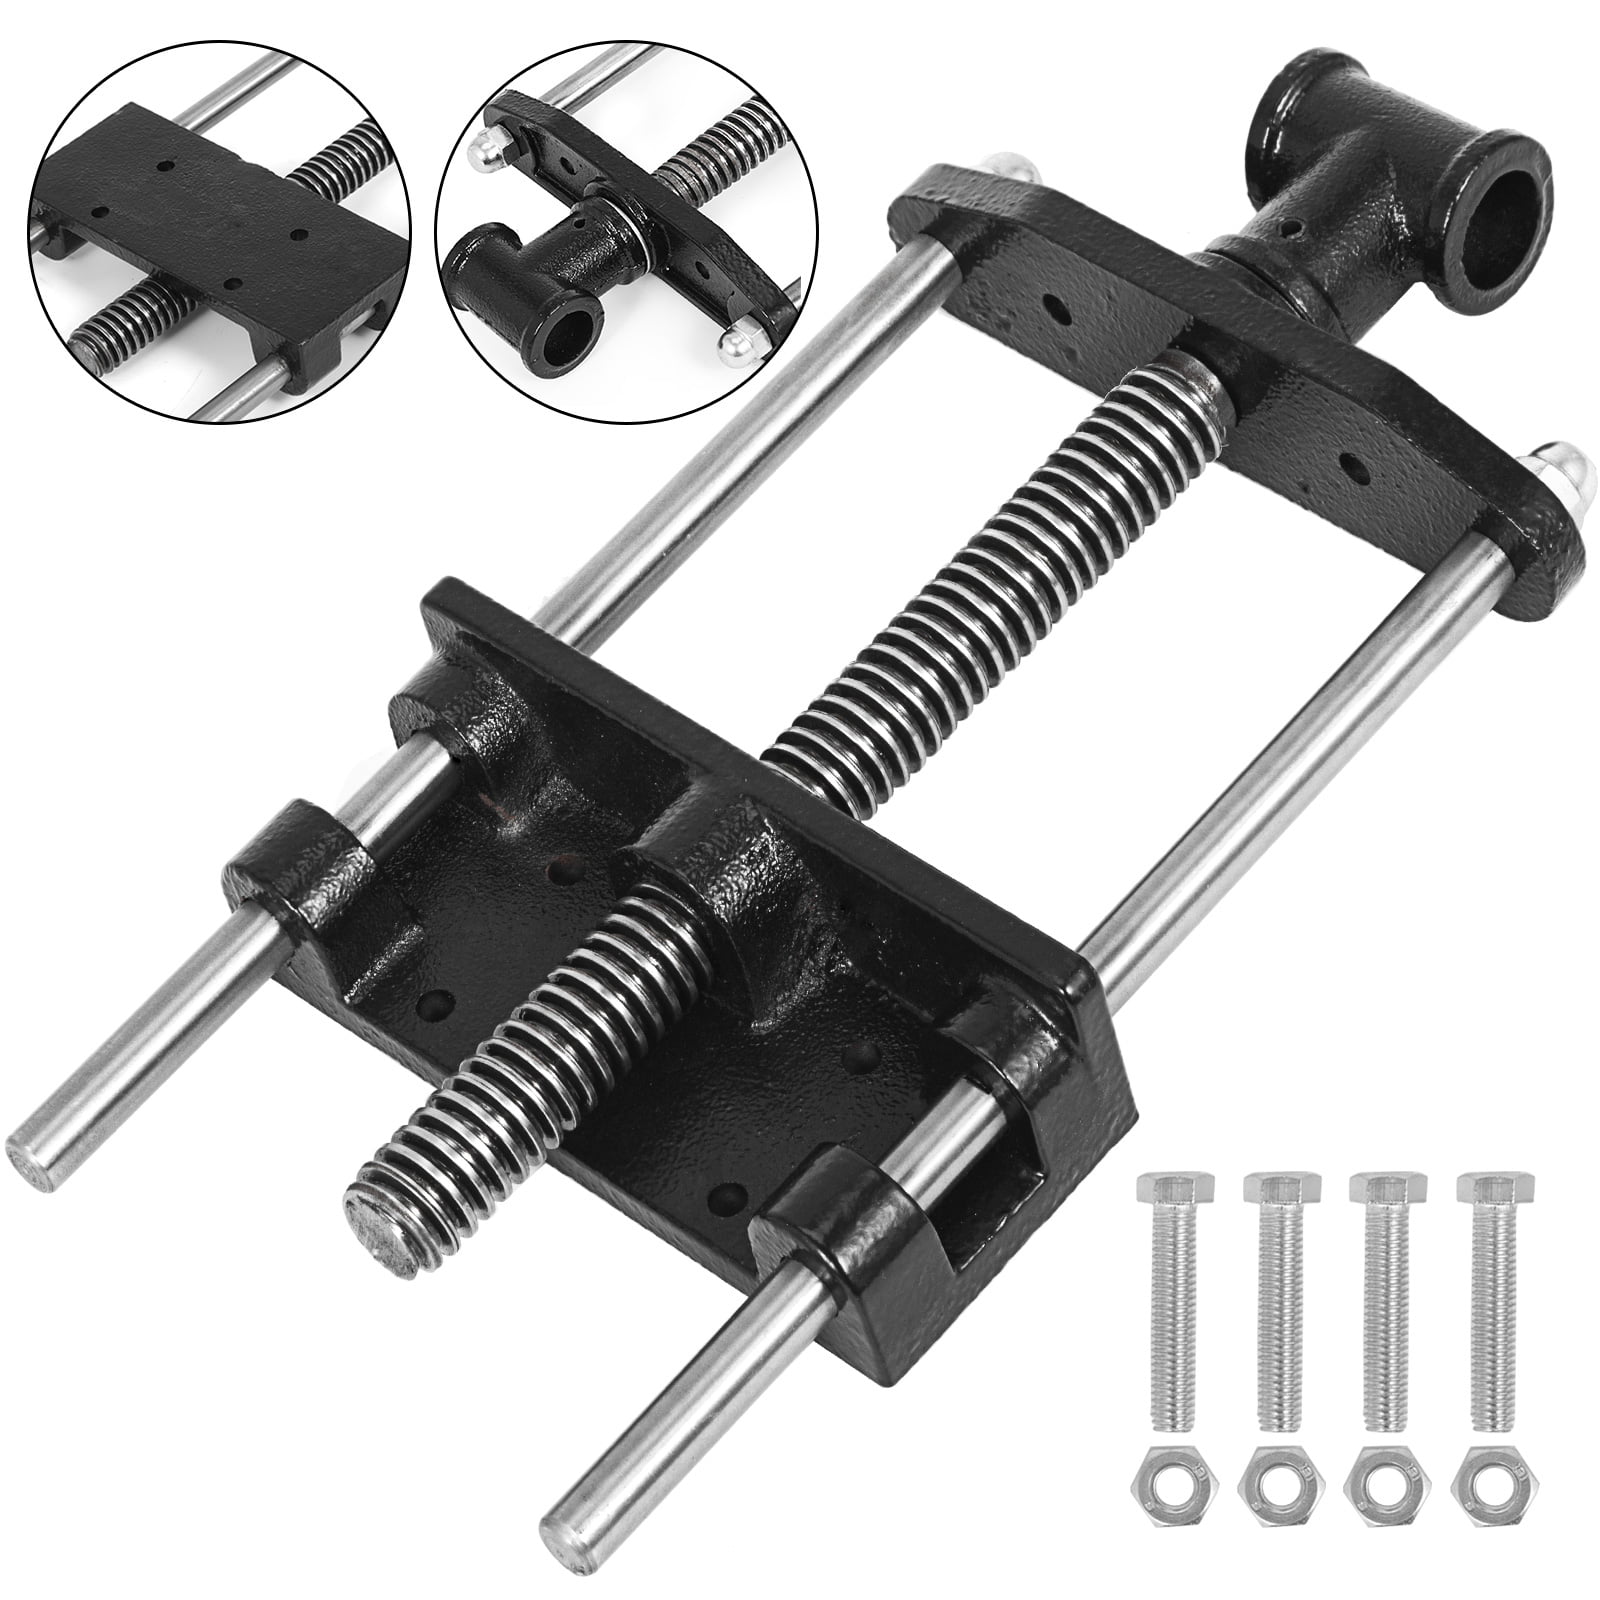 Vice Woodworking 8'' Clamp Jaws Cast Iron Body Screw Handle Chrome Plated Steel 